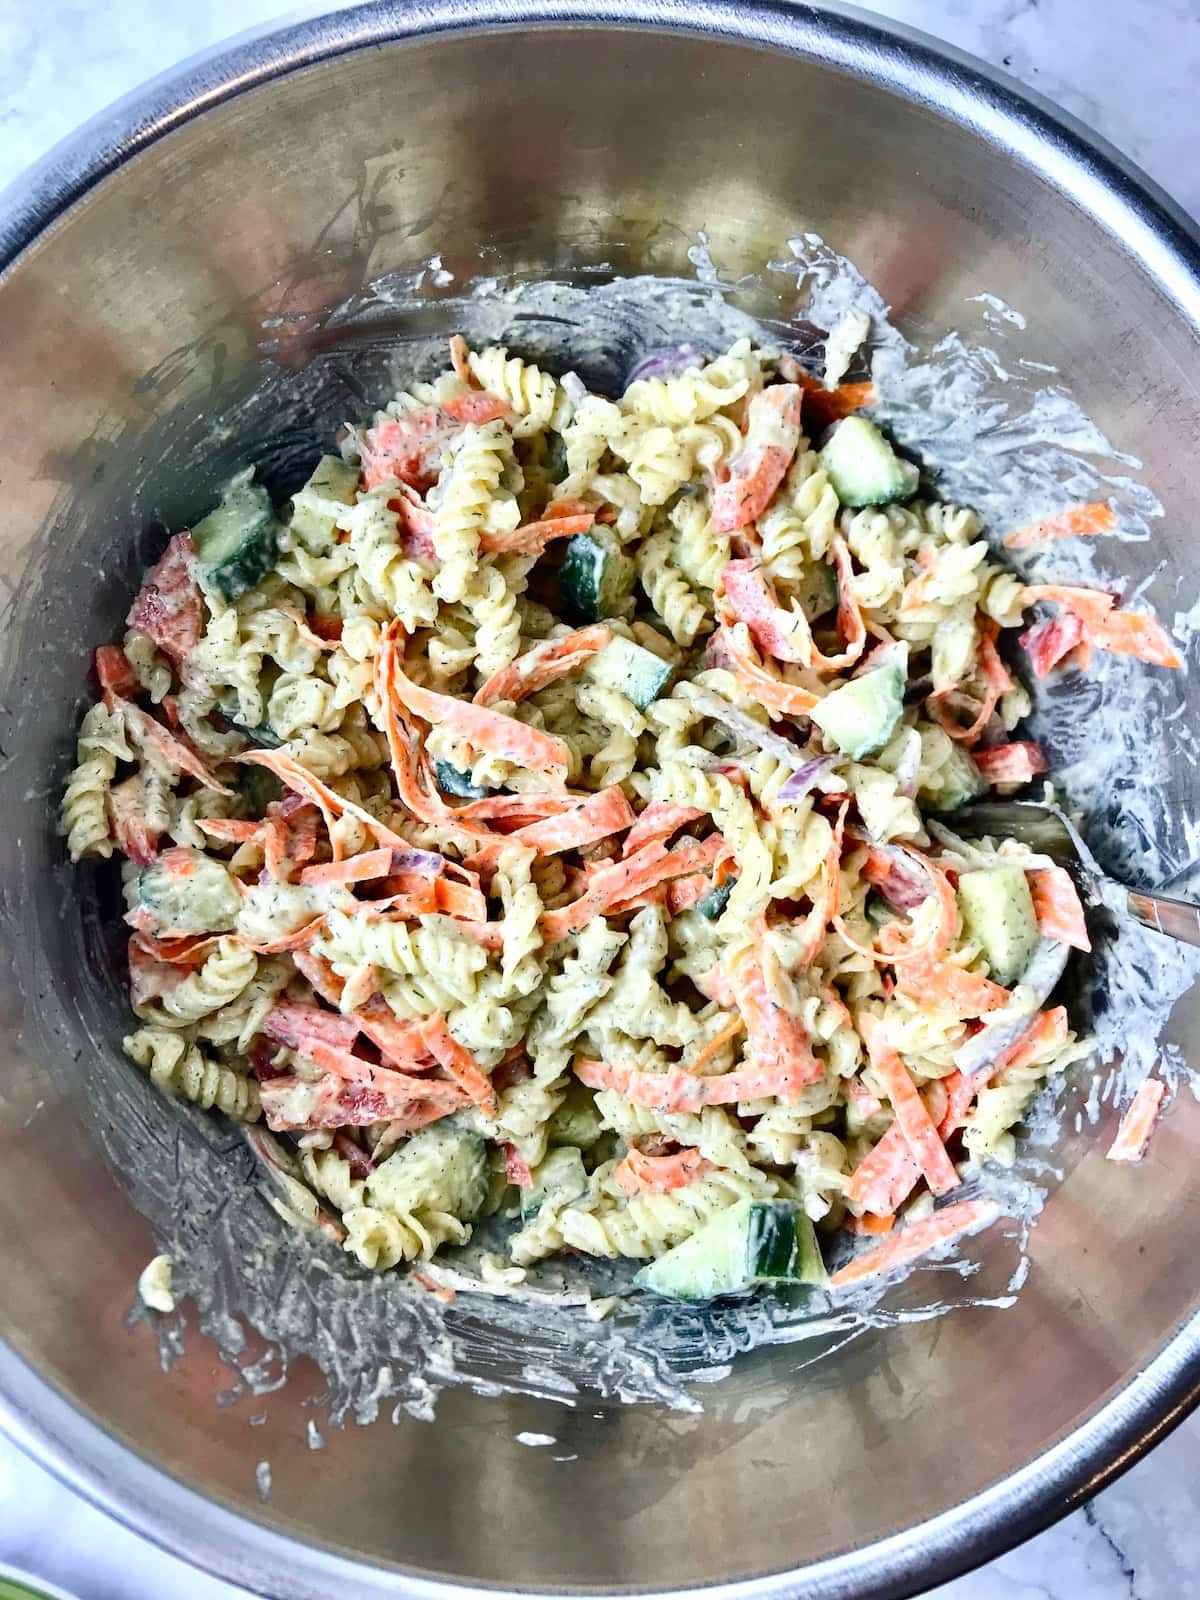 A bowl of pasta and veggies mixed with hummus dressing.